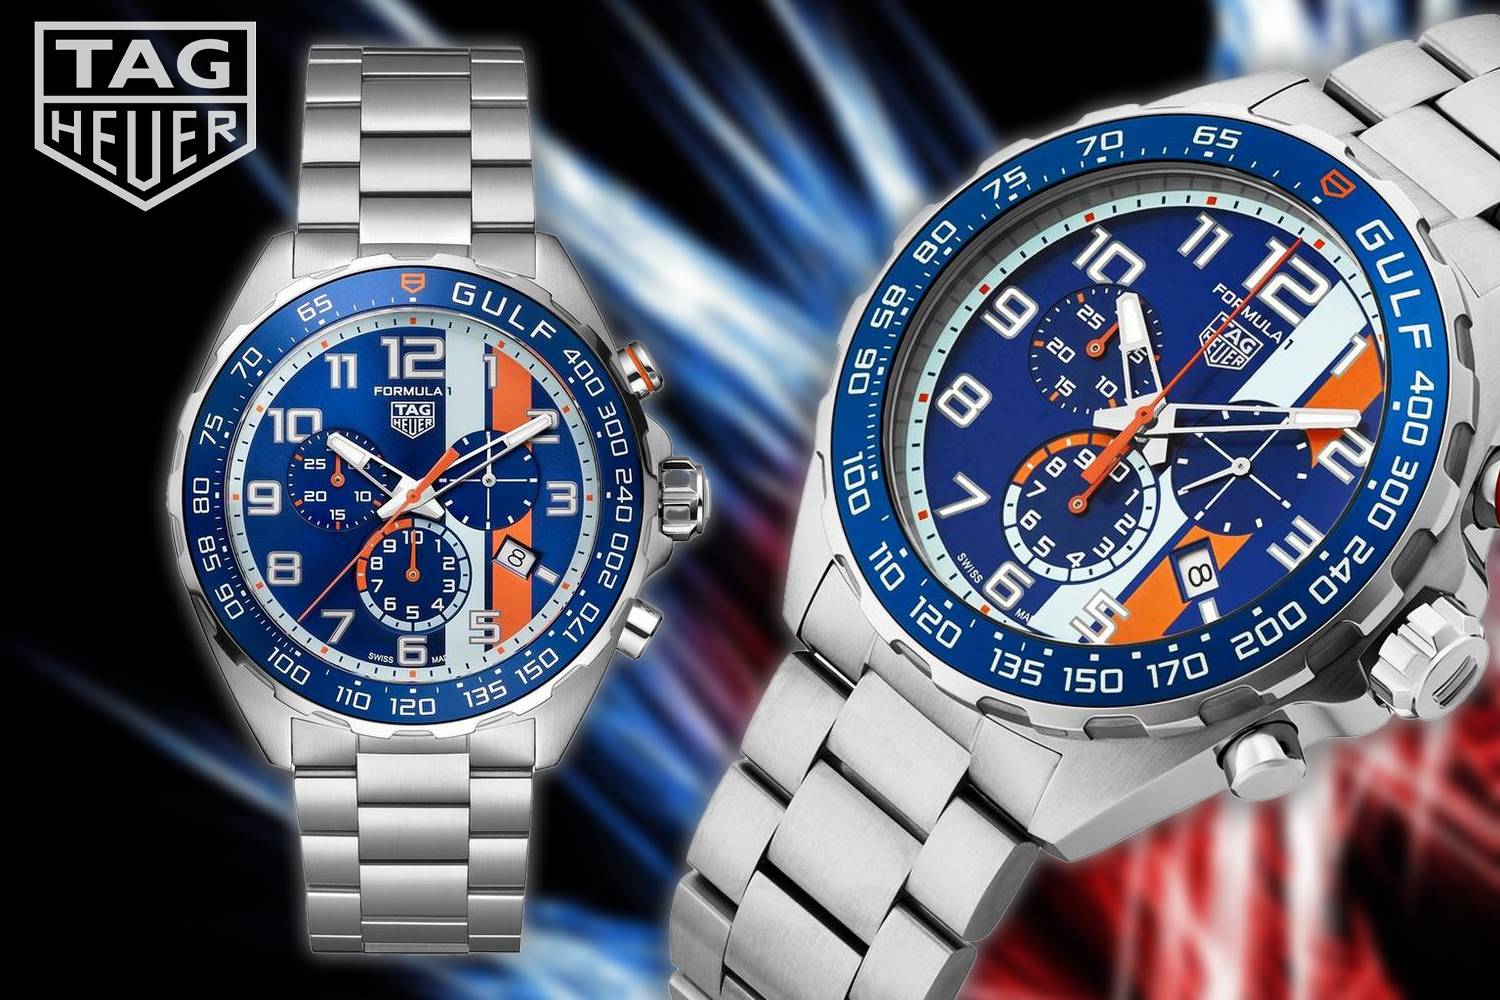 Win this Tag Heuer Watch Formula 1 Gulf Special Edition